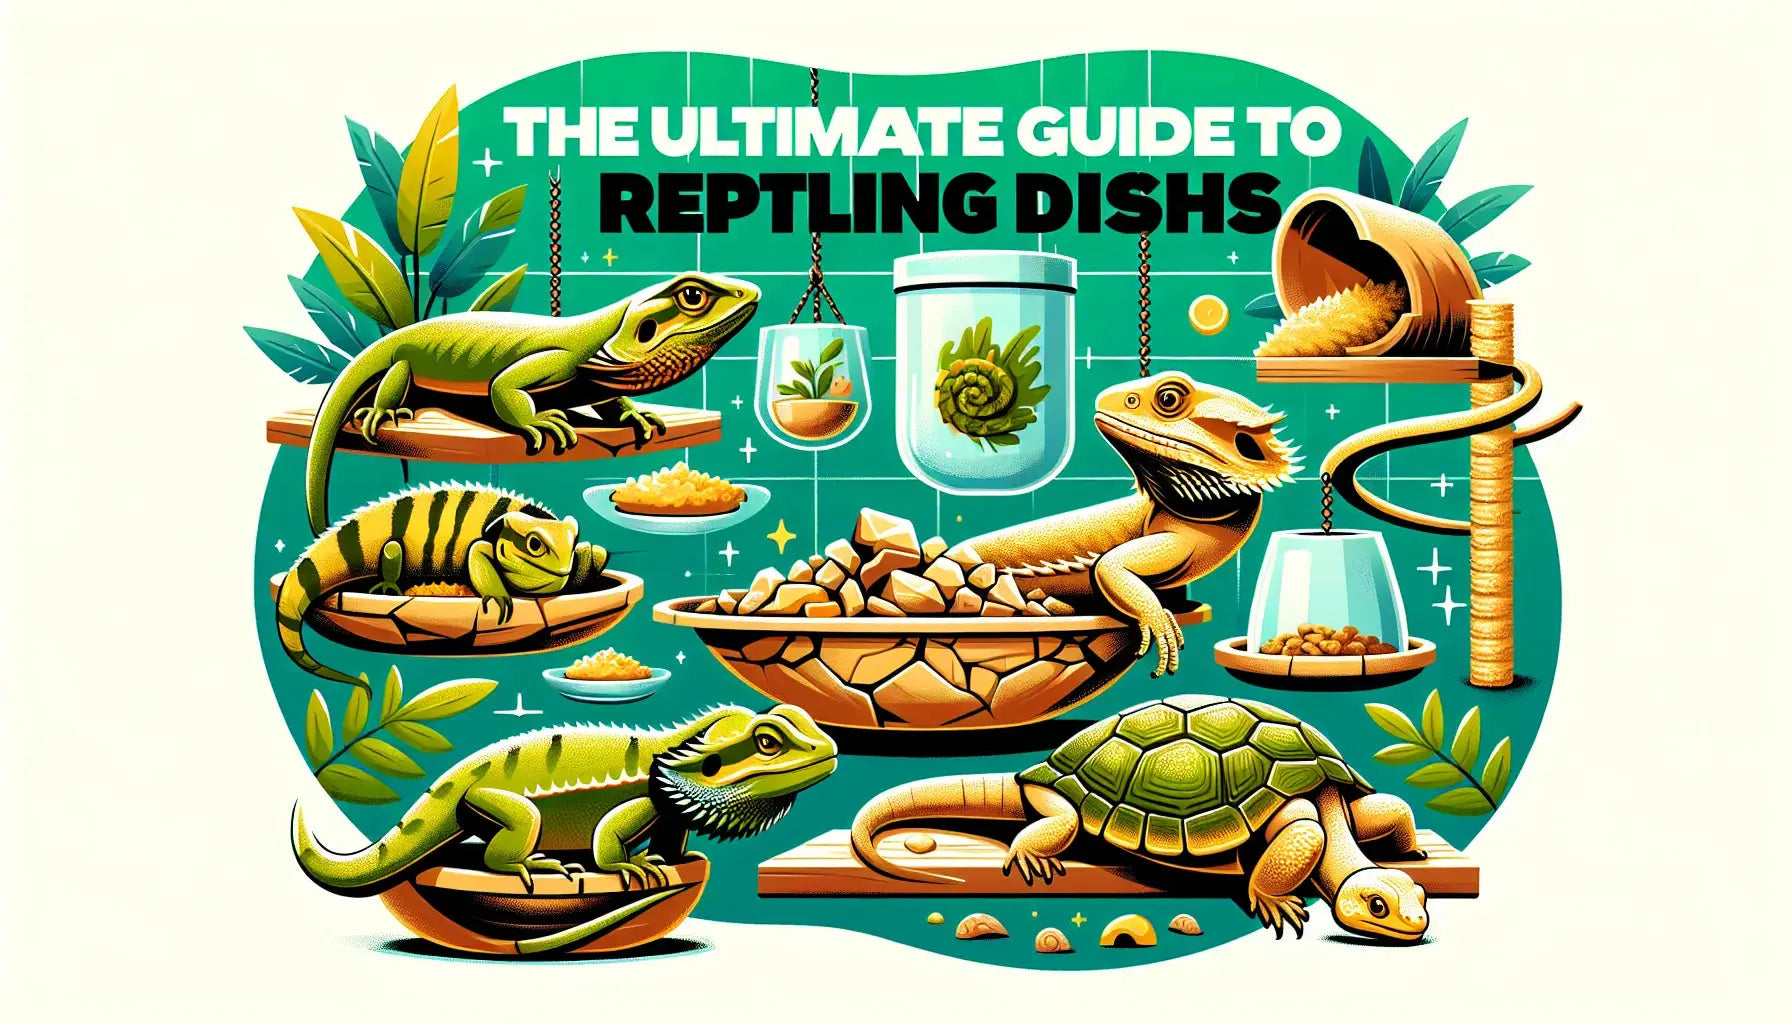 The Ultimate Guide to Reptile Feeding Dishes